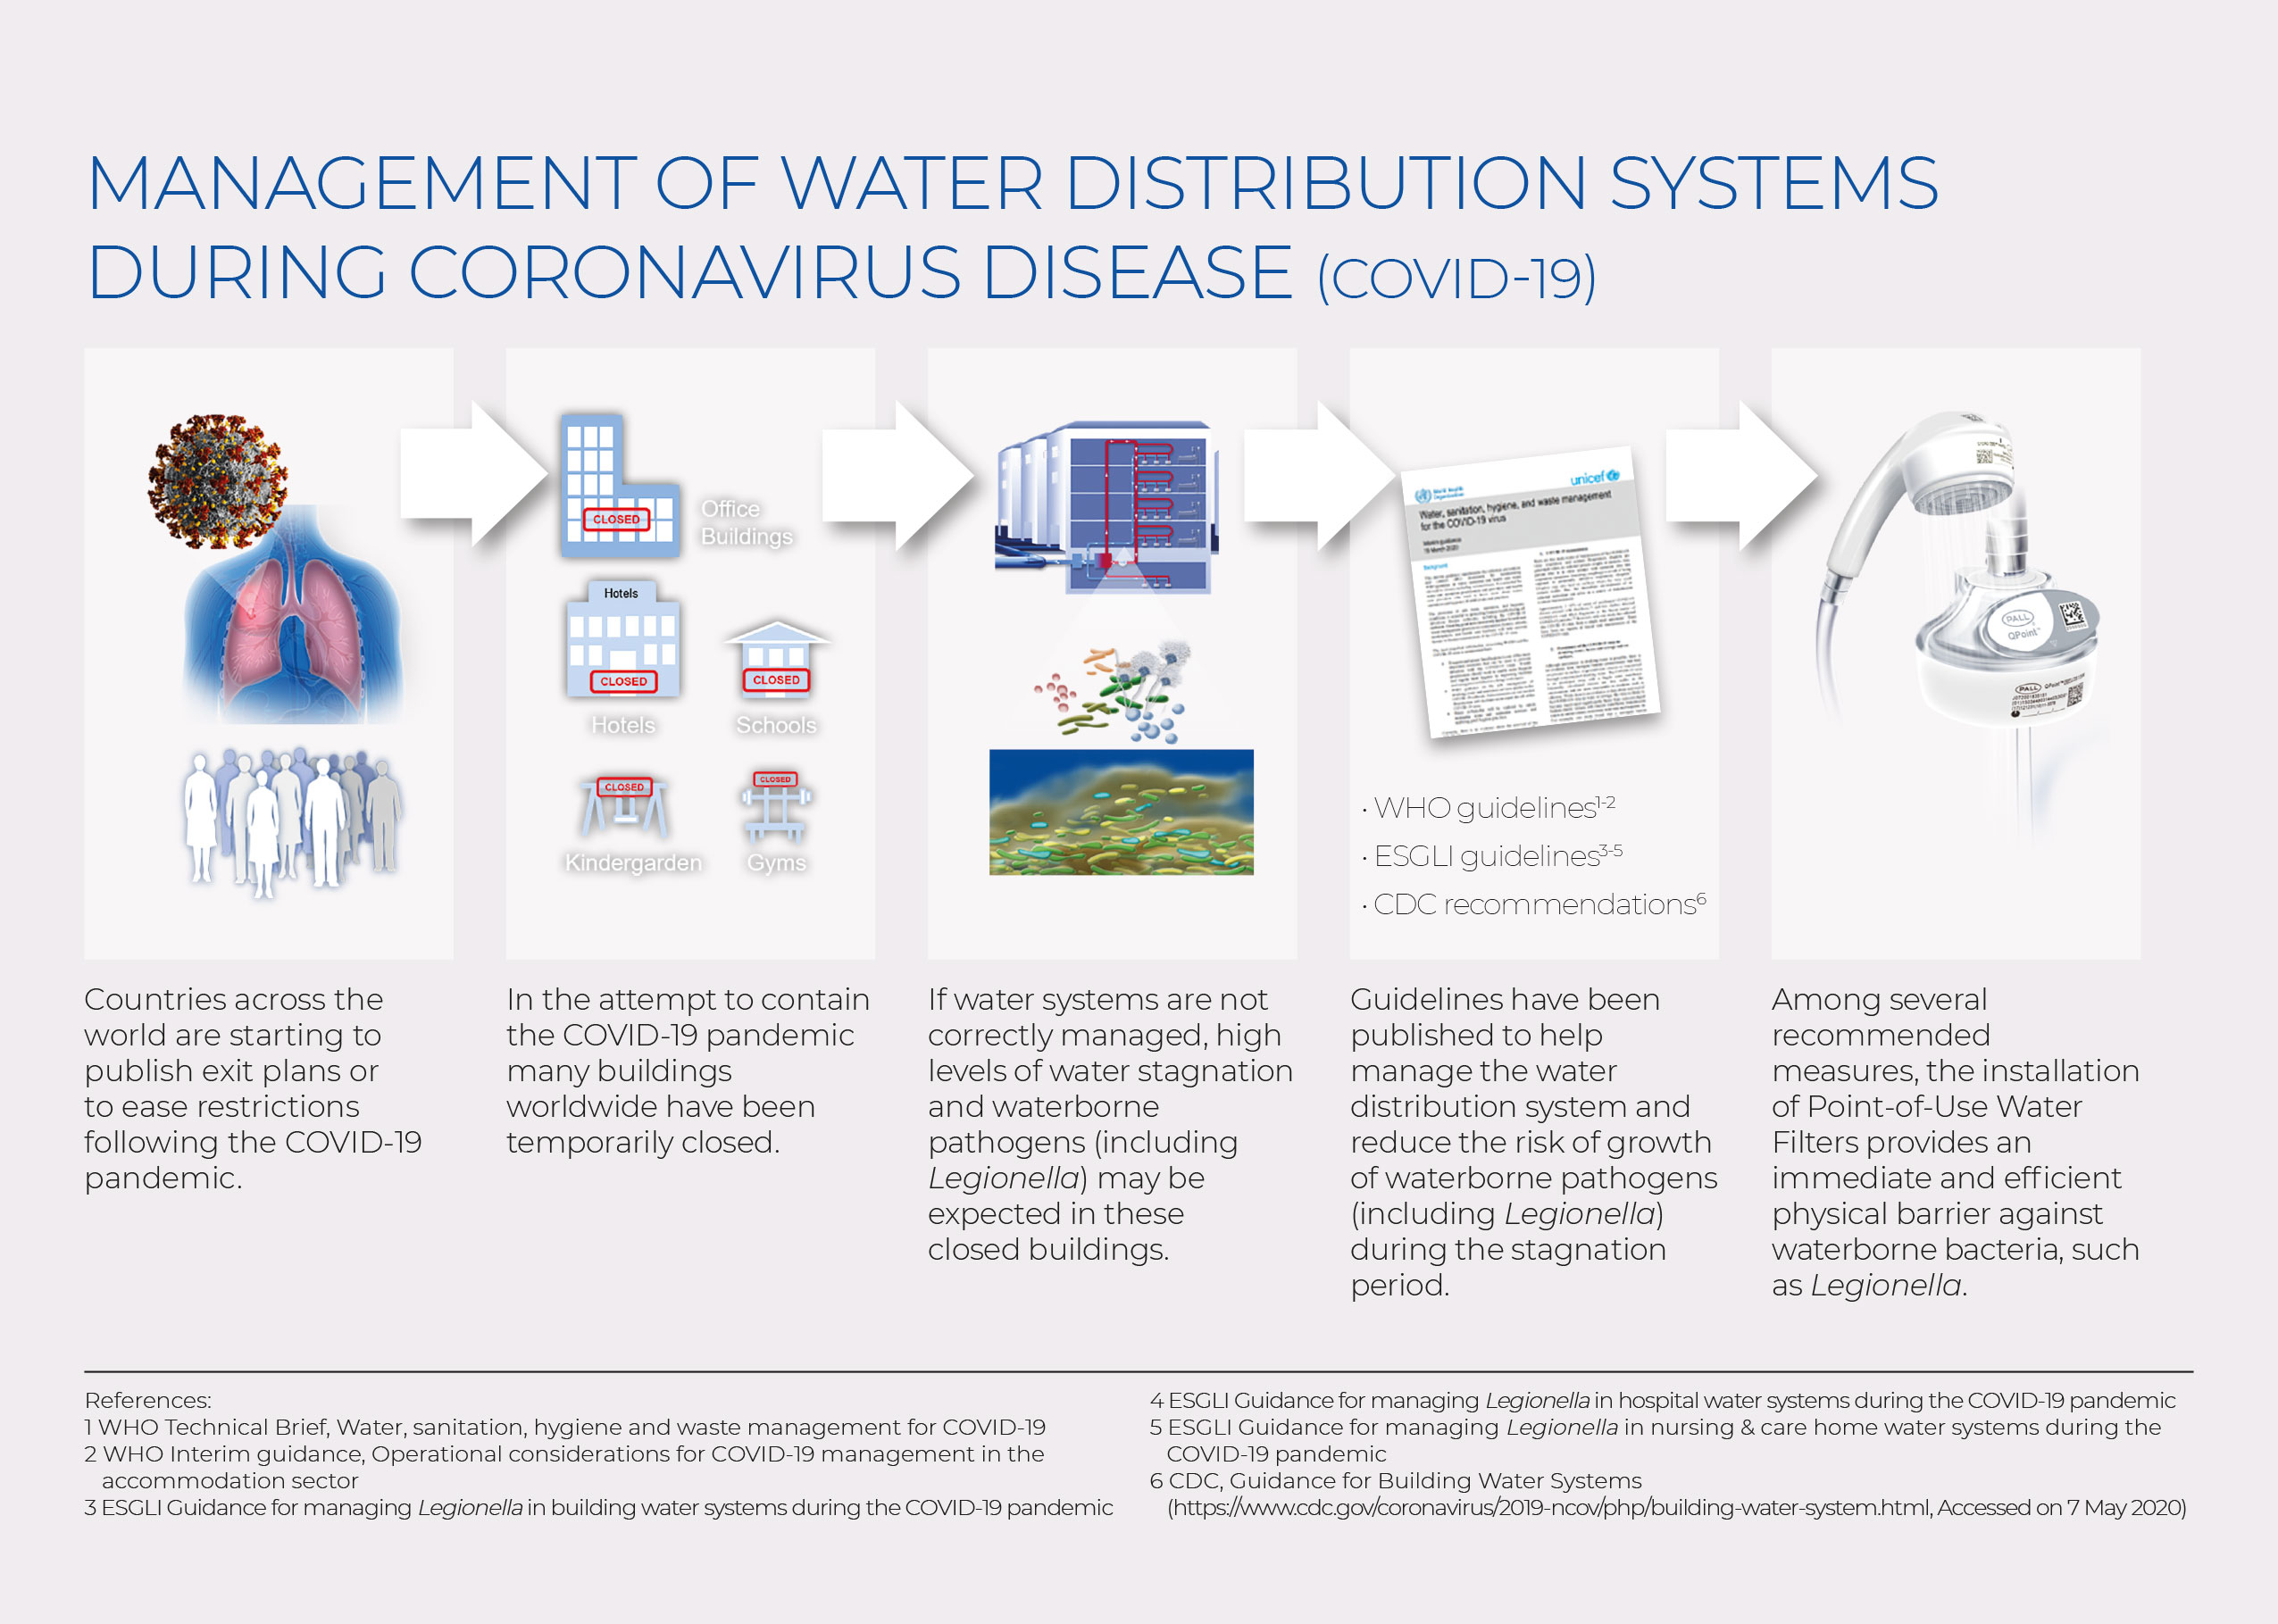 Management of water distribution systems during coronavirus